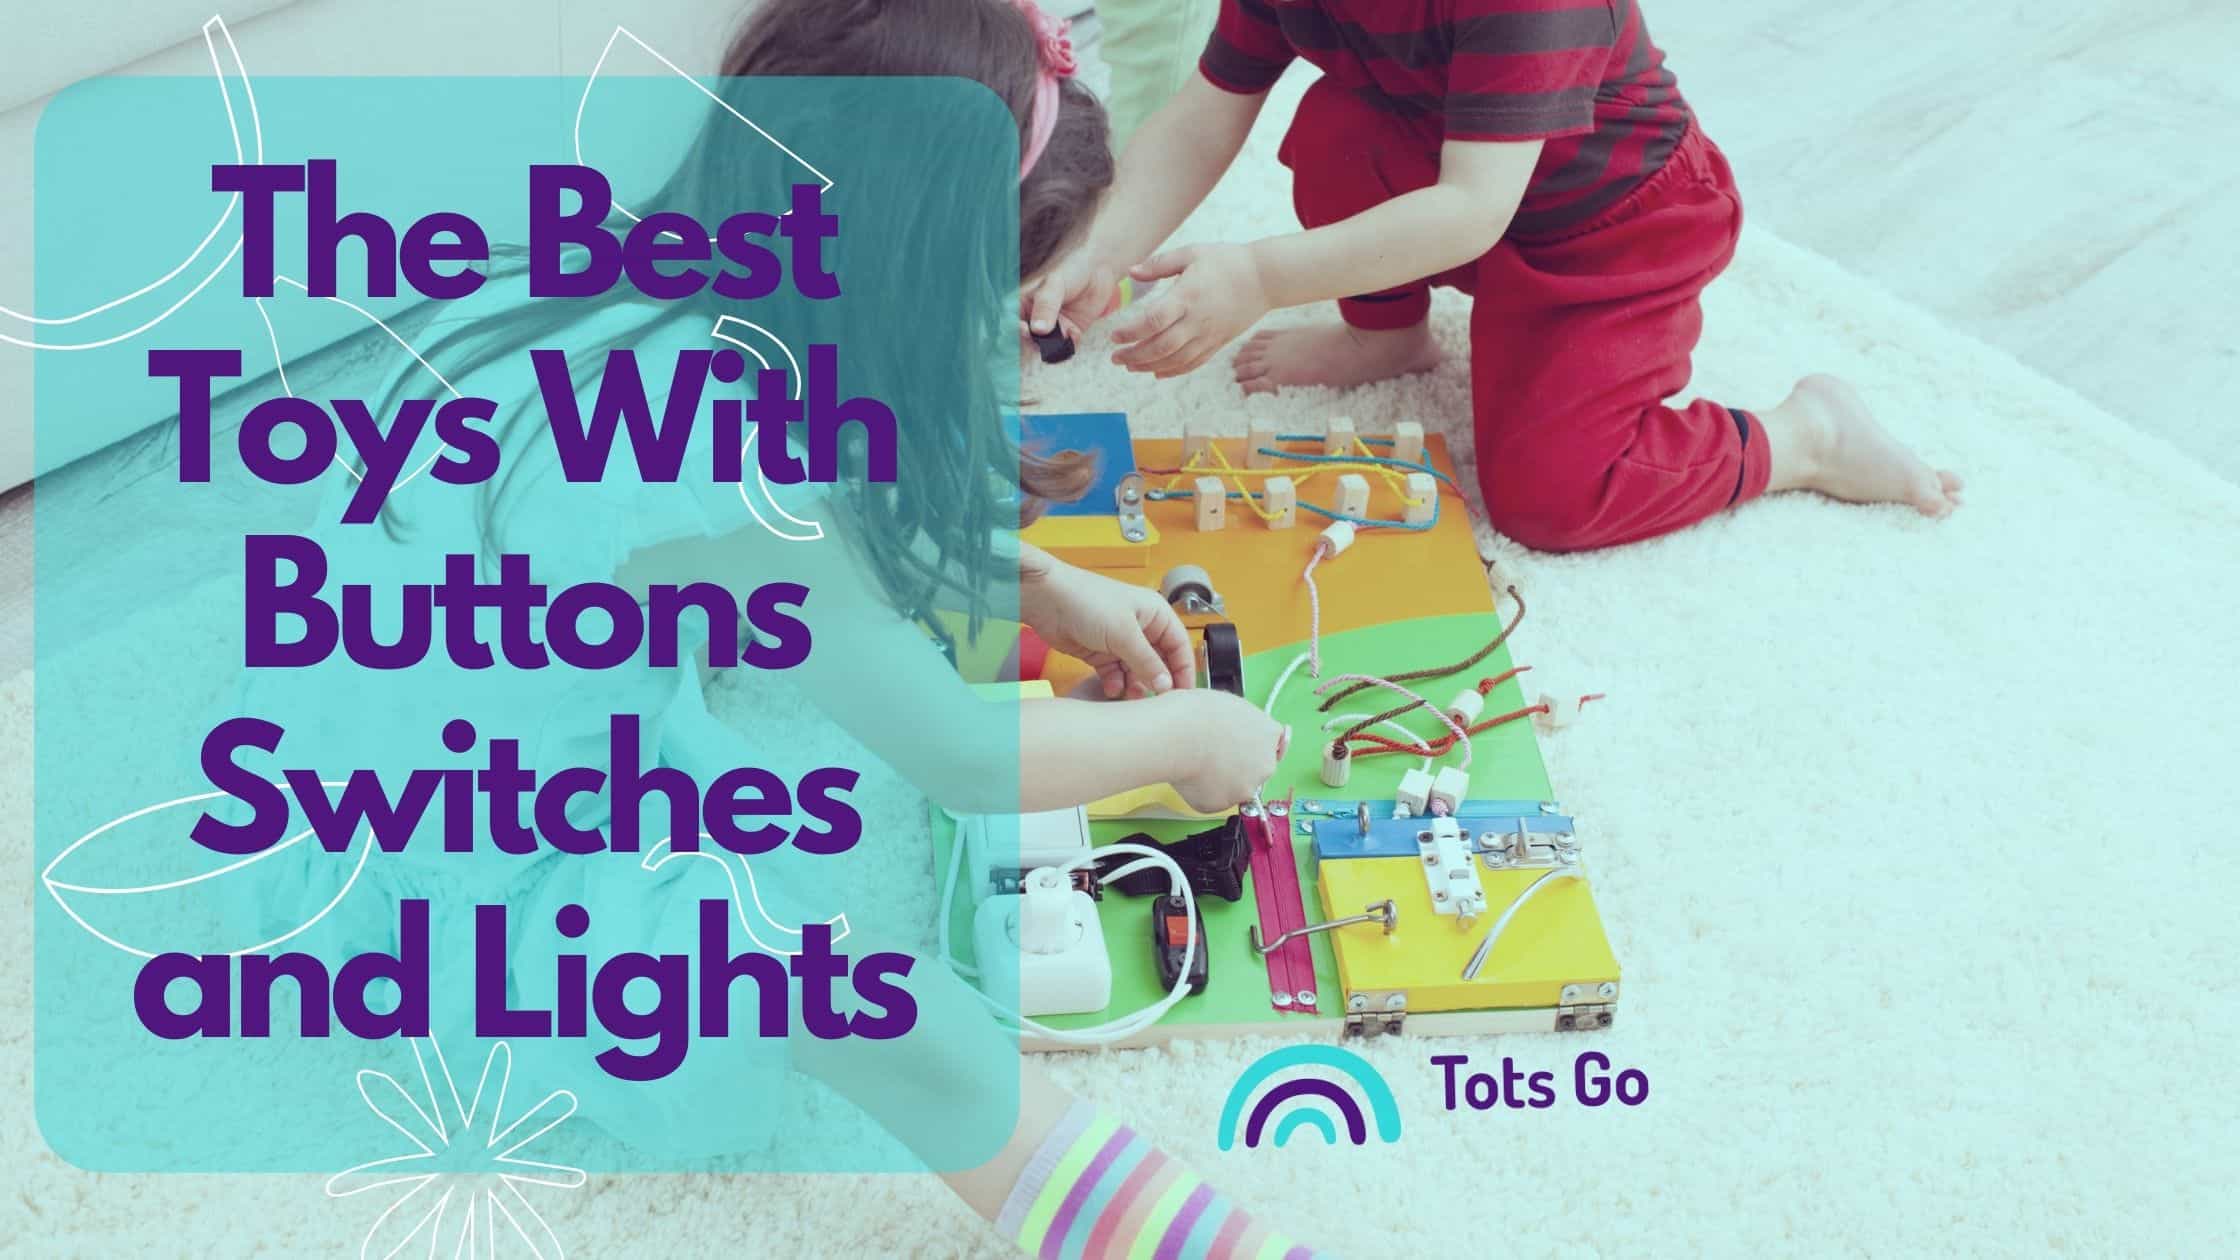 The Best Toys With Buttons Switches and Lights